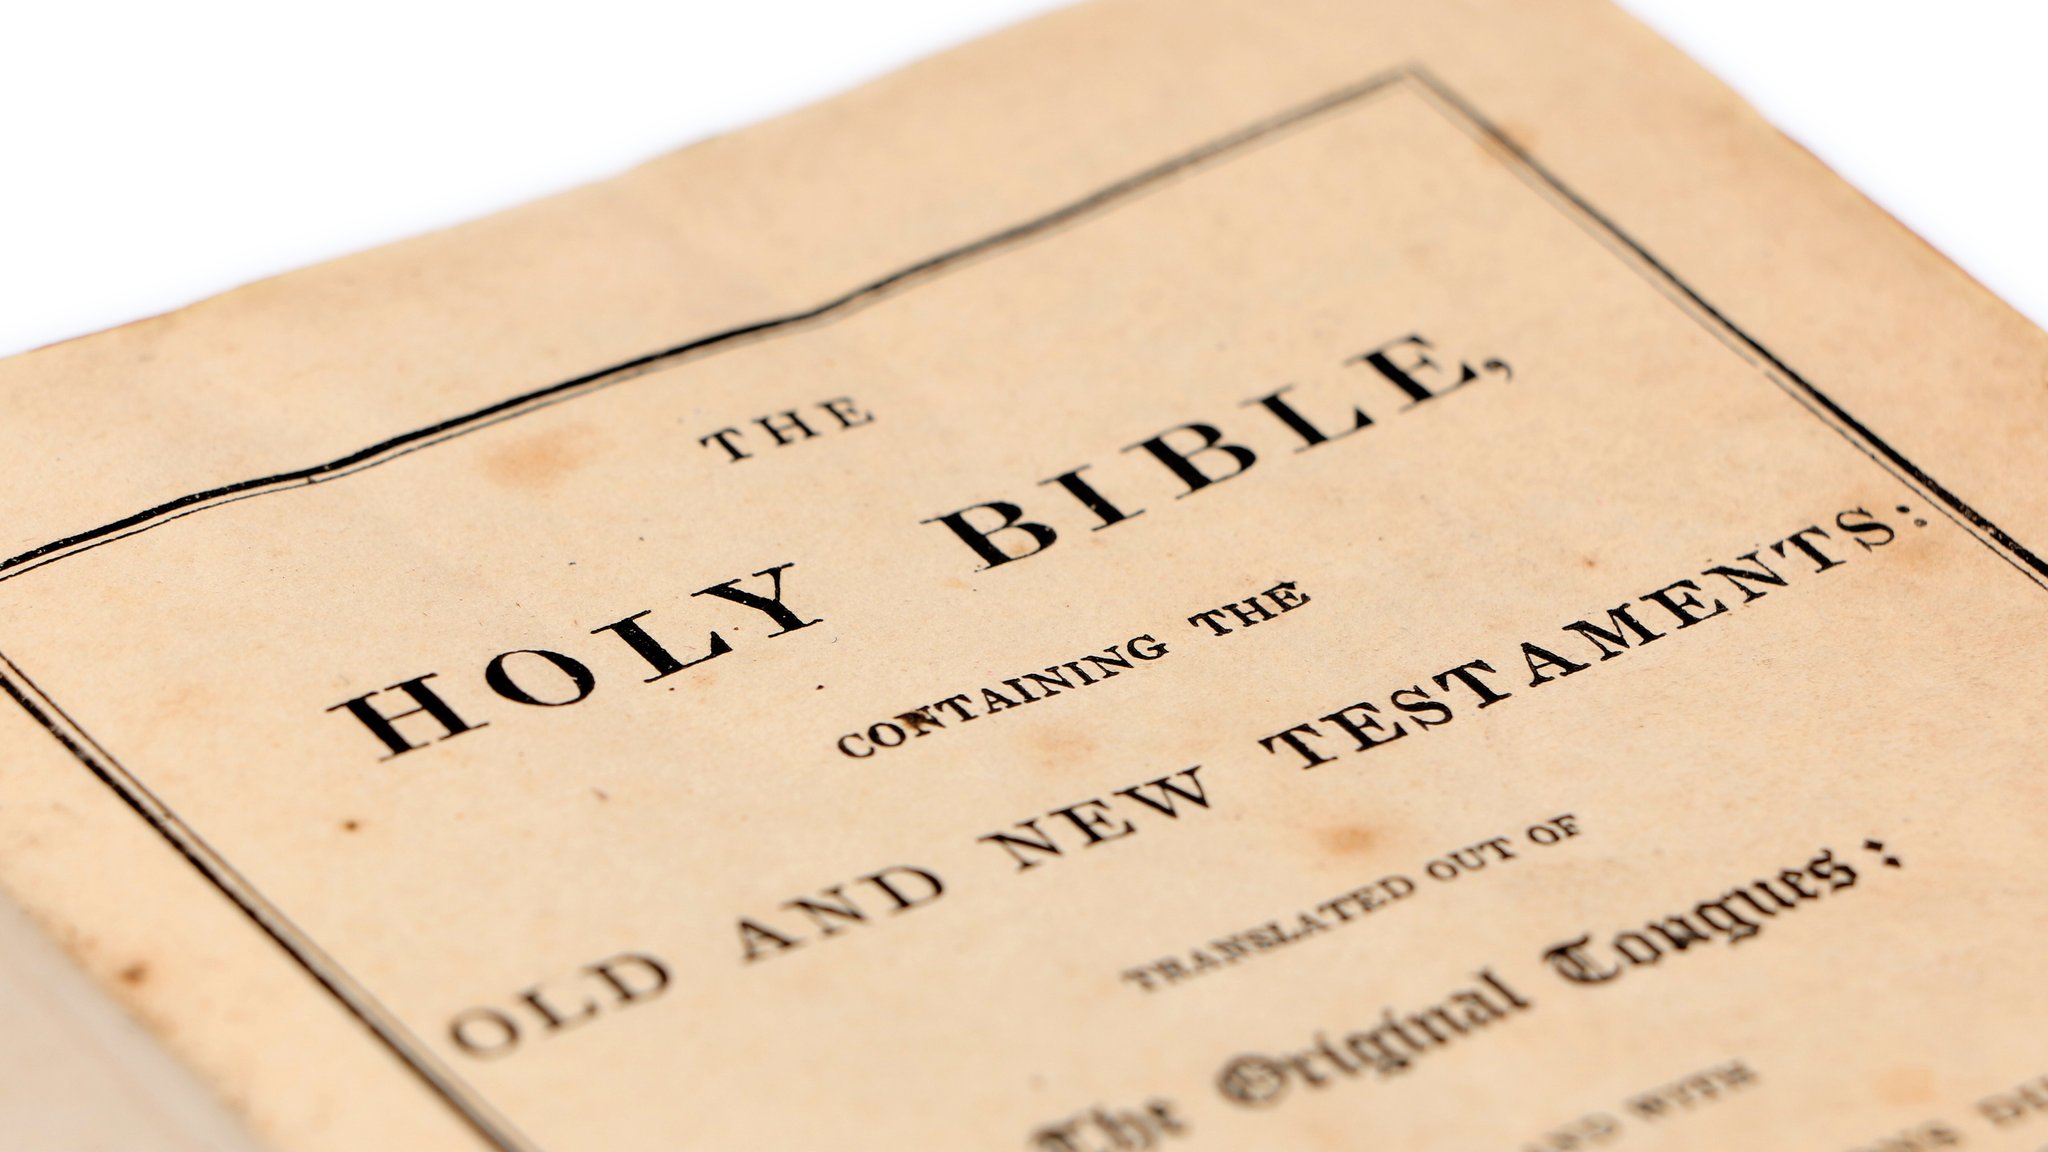 Utah primary schools ban Bible for vulgarity and violence